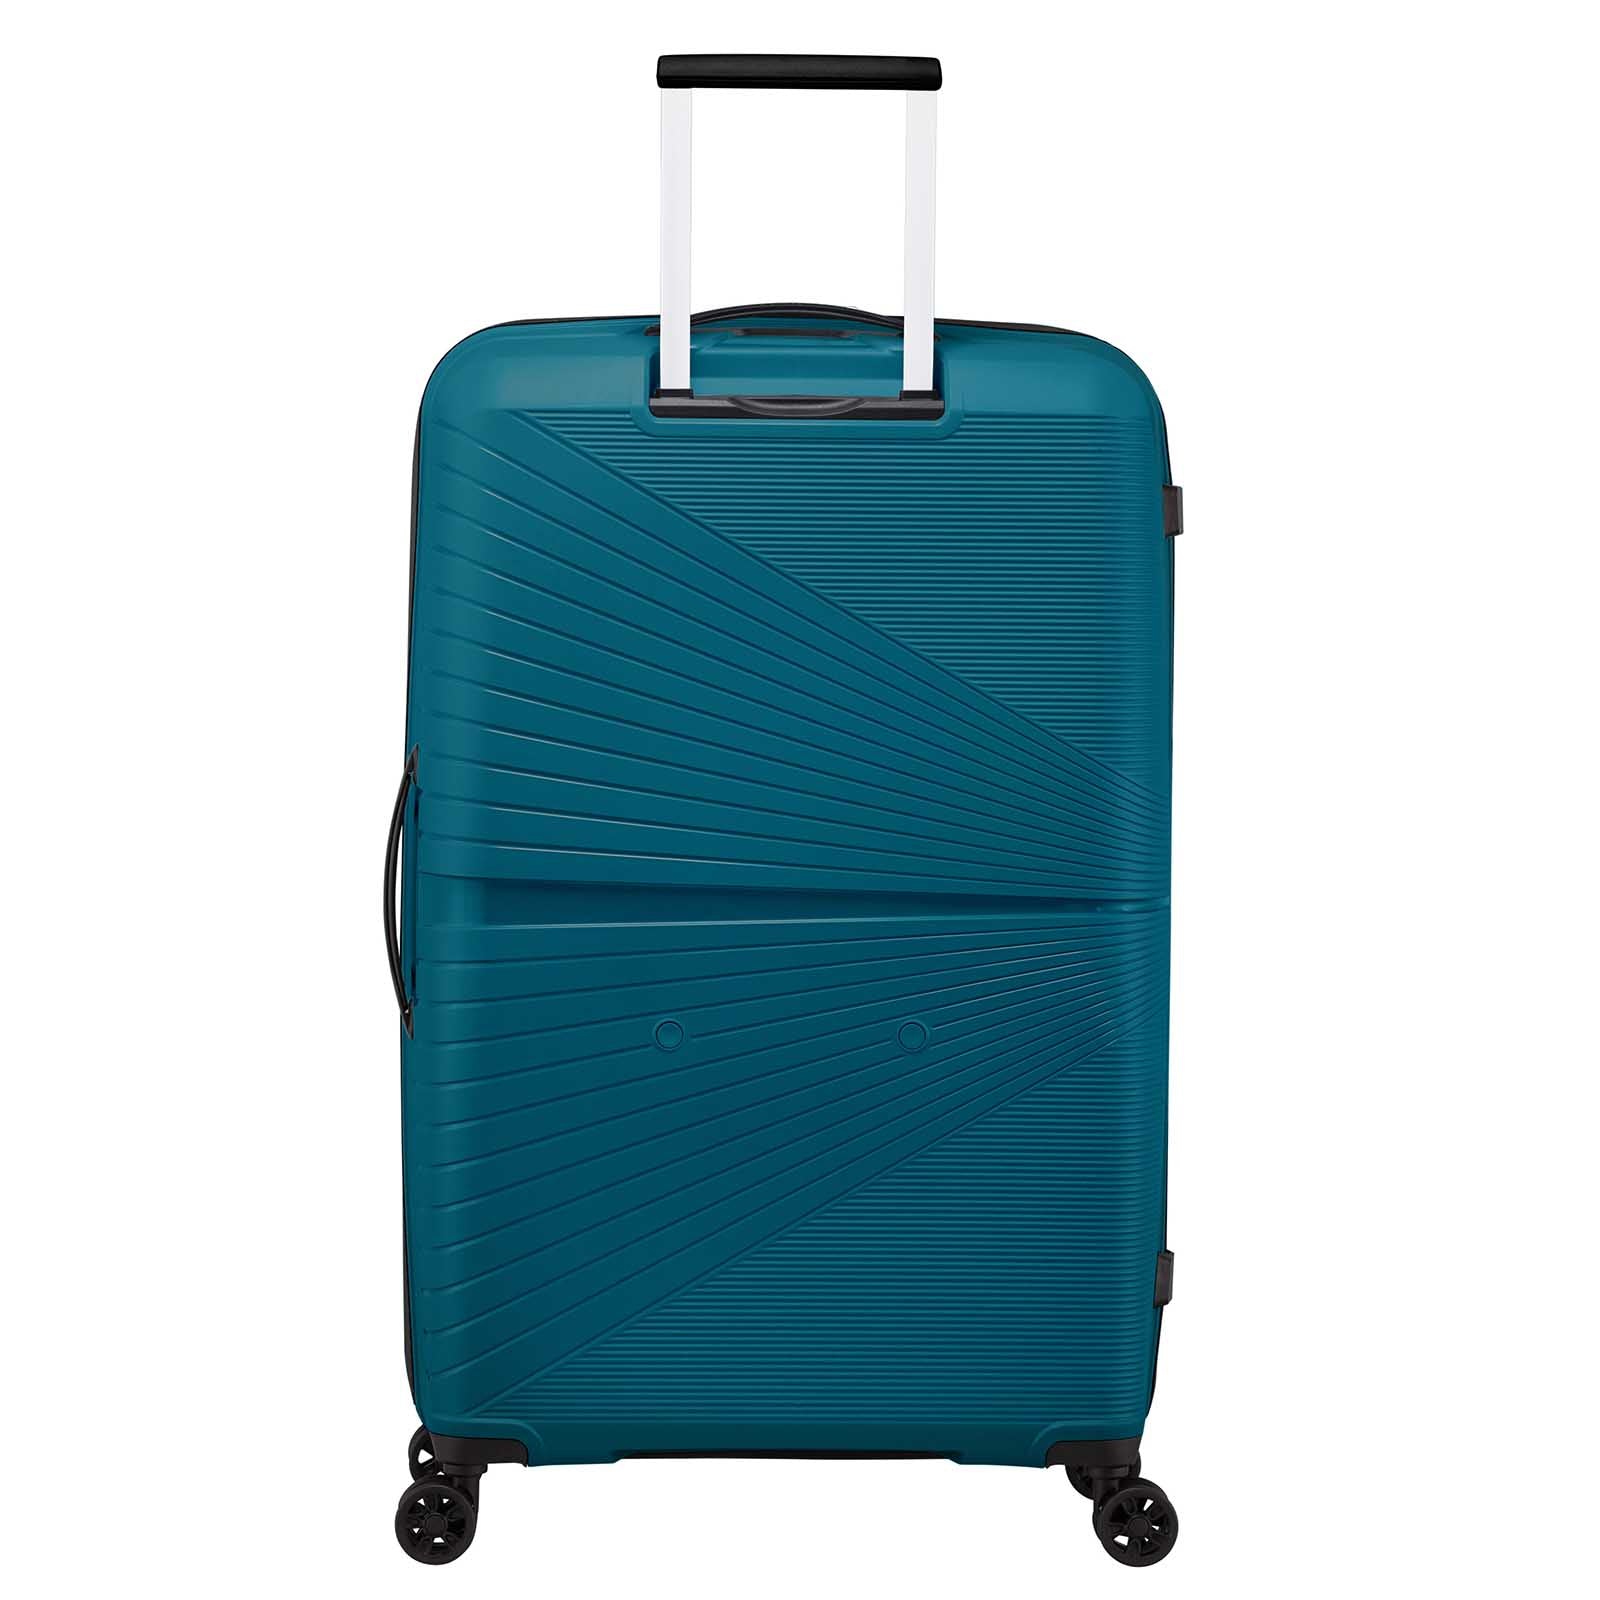 American-Tourister-Airconic-77cm-Suitcase-Deep-Ocean-Back